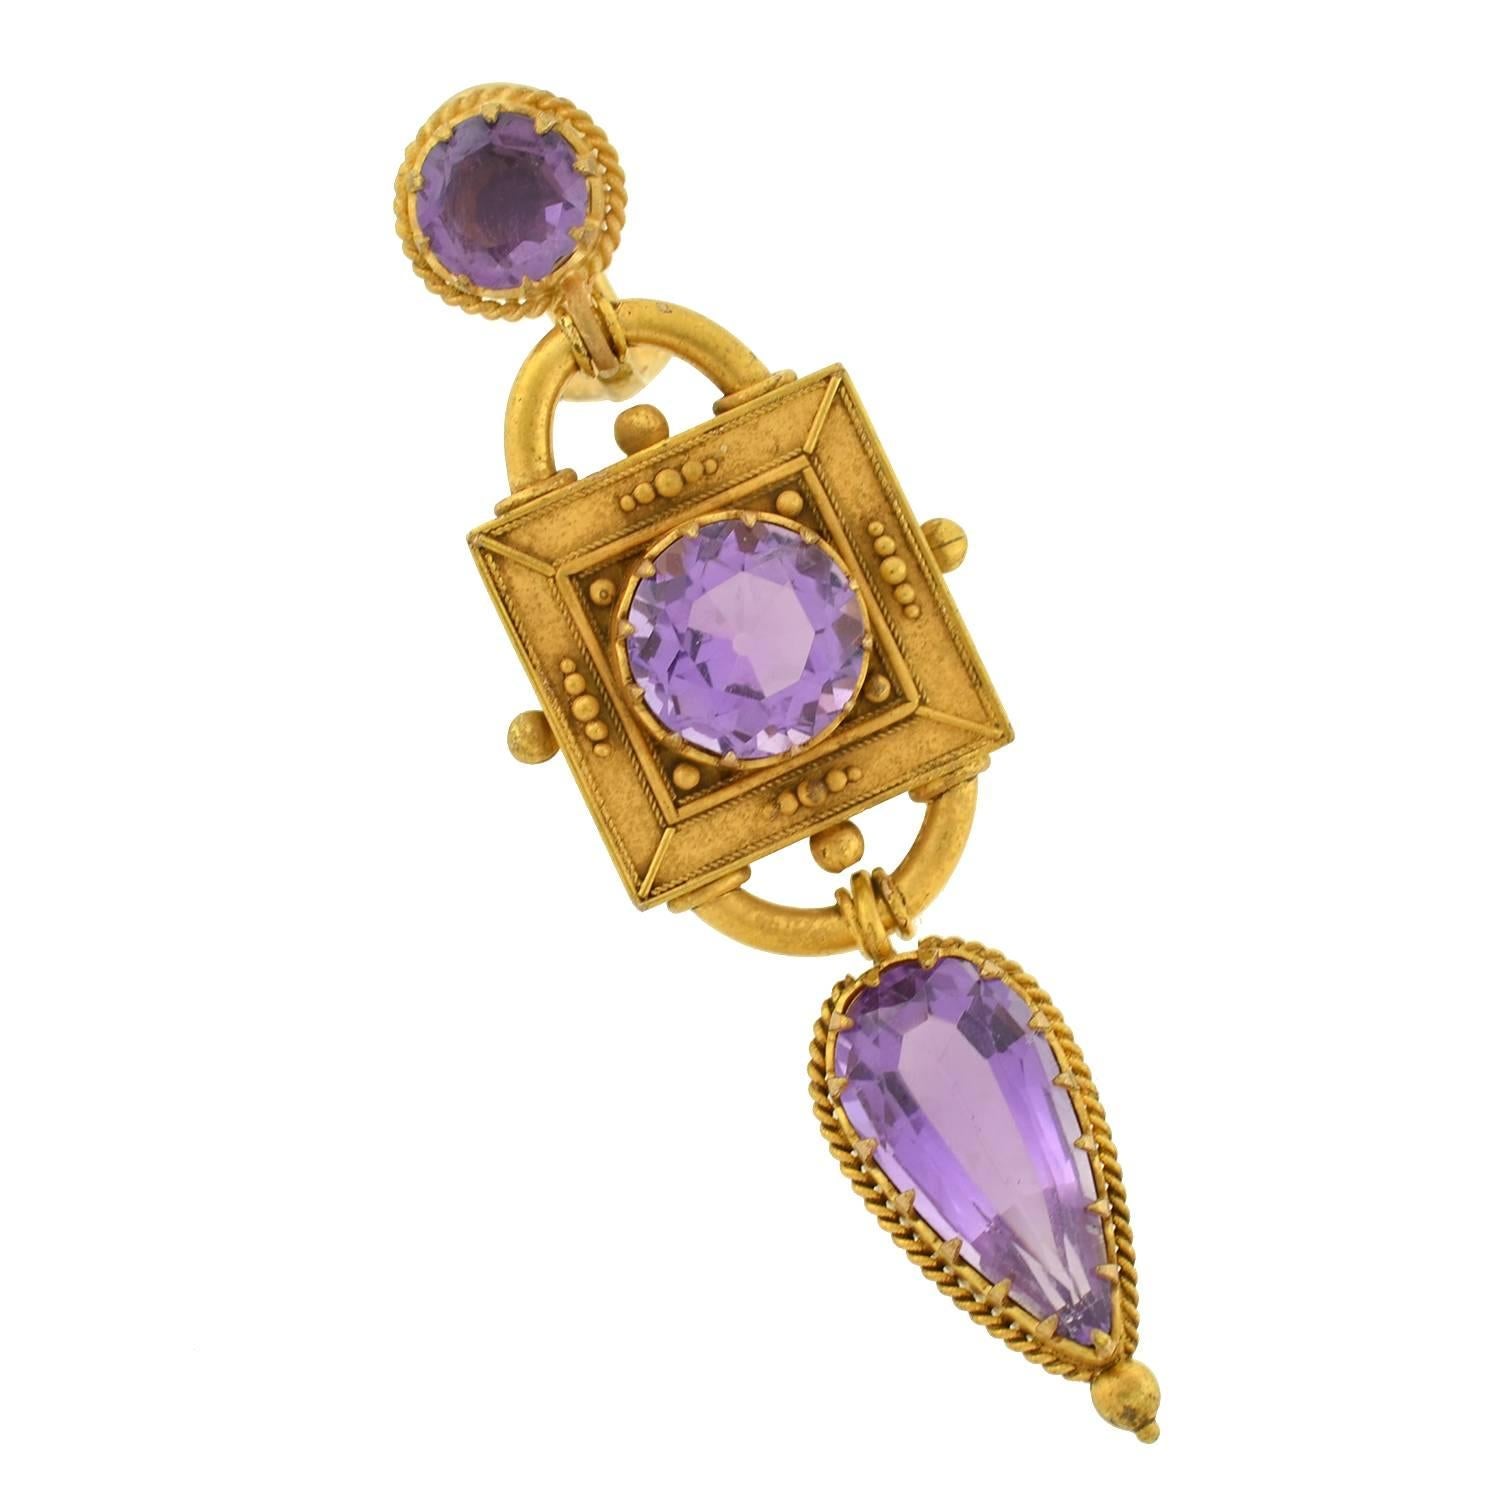 Fantastic amethyst earrings from the Victorian (ca1880) era! These gorgeous earrings are made of rich 18kt yellow gold and feature an exquisite architectural design. Each begins with an amethyst stone which is prong set and framed by a twisted rope